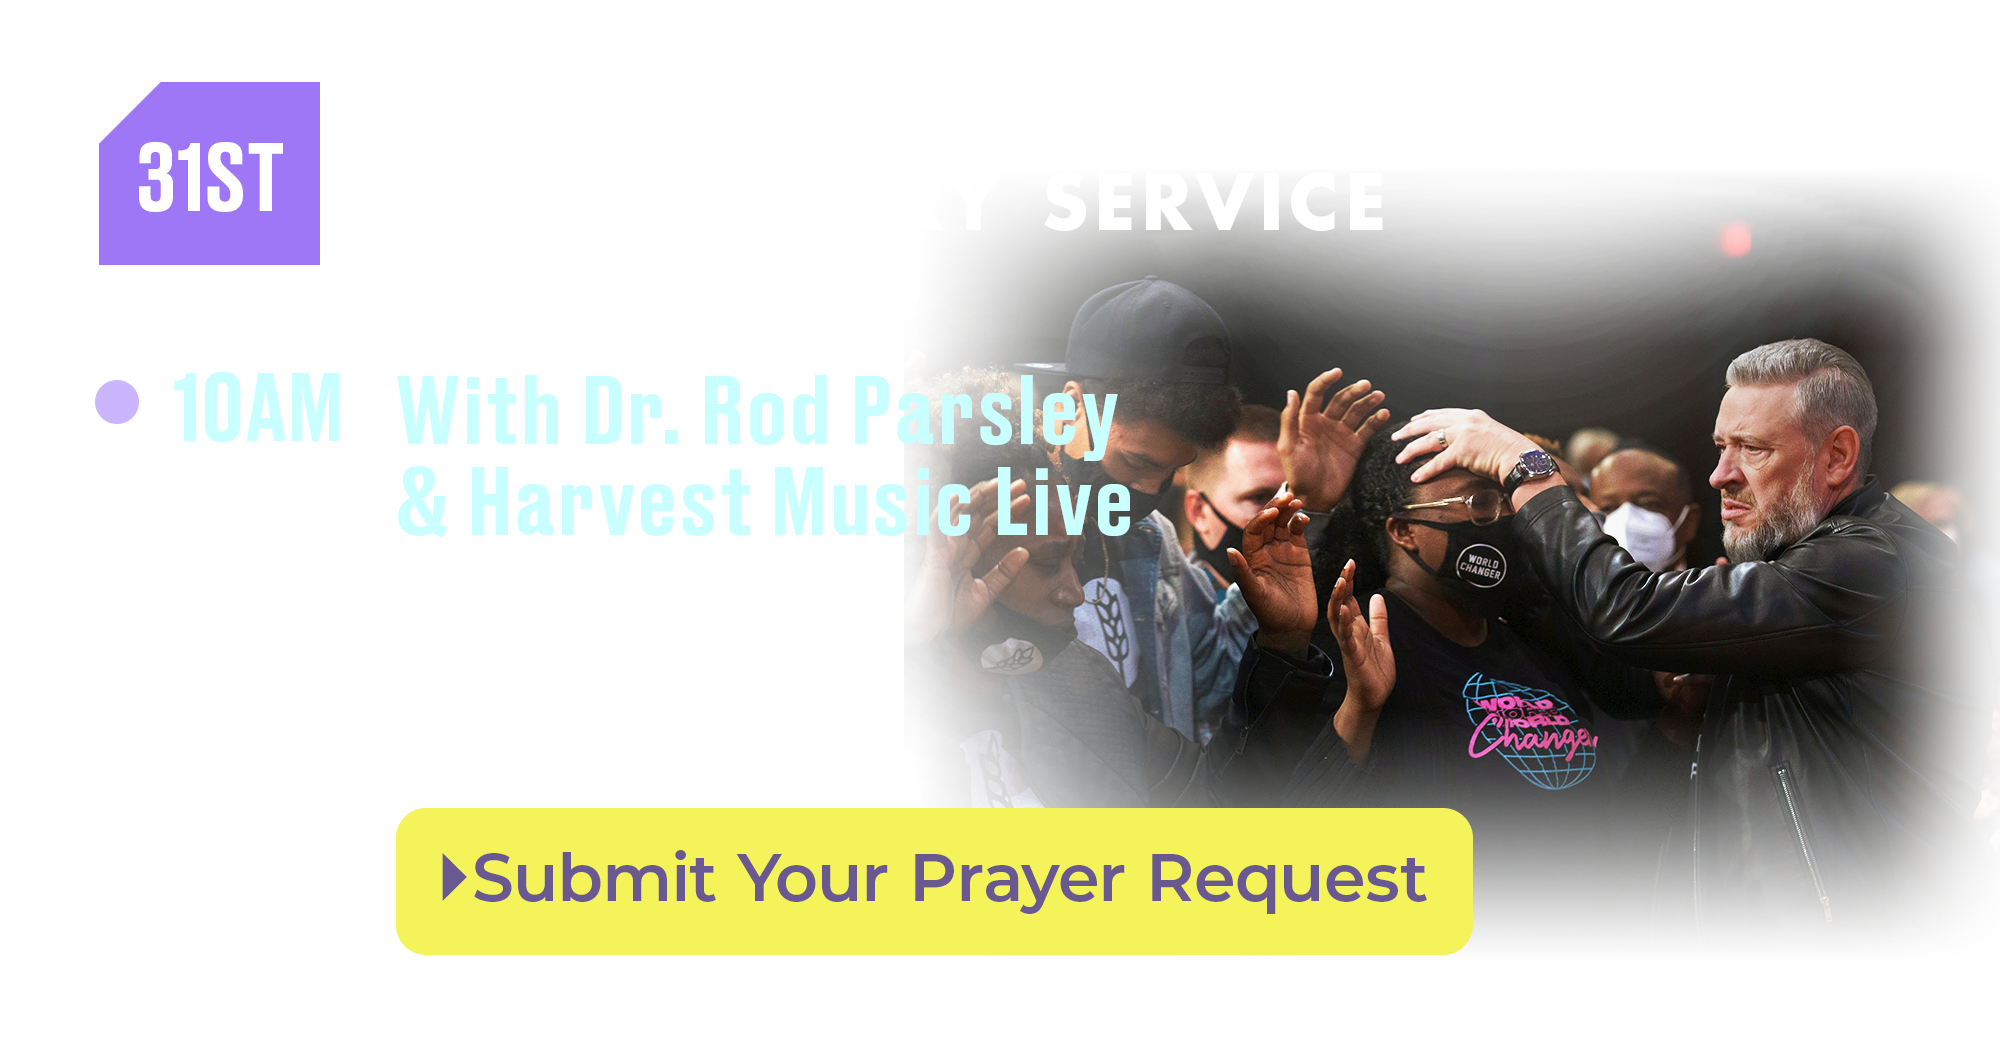 31ST Miracle, Healing, and Victory Service 10AM With Dr. Rod Parsley and Harvest Music Live Submit Your Prayer Request